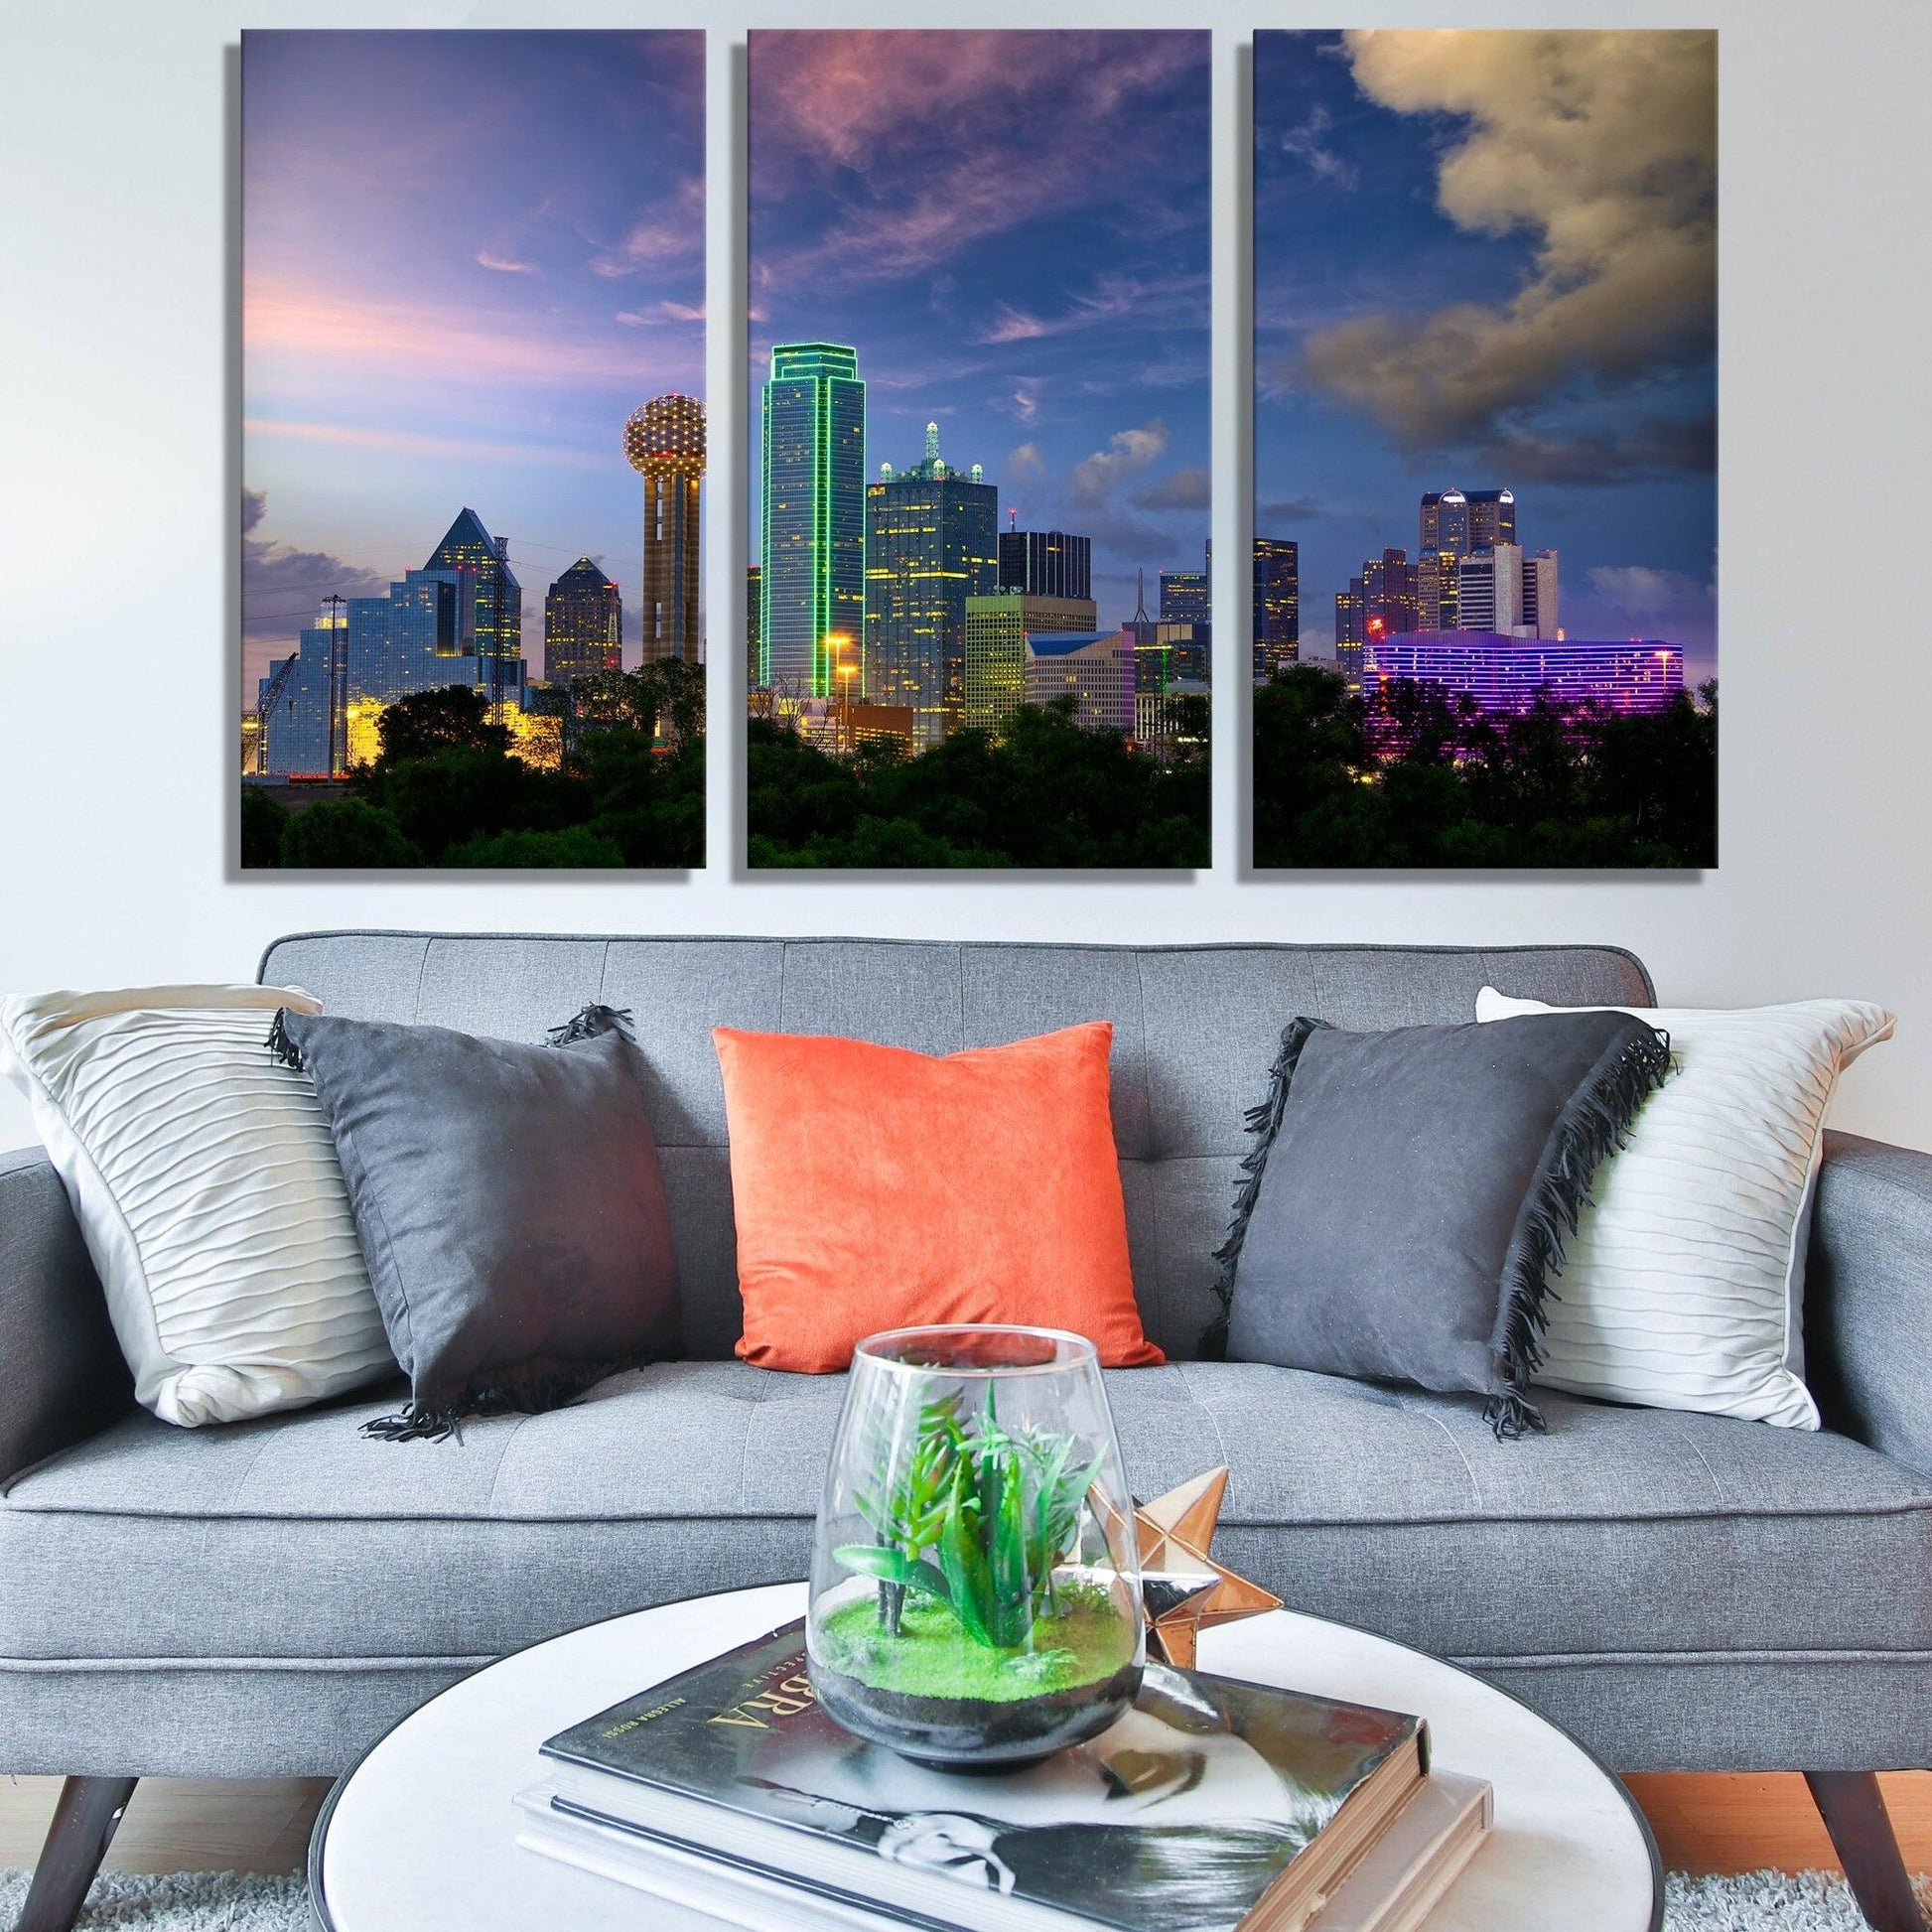 The guests Seasickness Sophisticated Dallas City canvas wall art| Texas USA Skyline, Triptych Canvas Print,